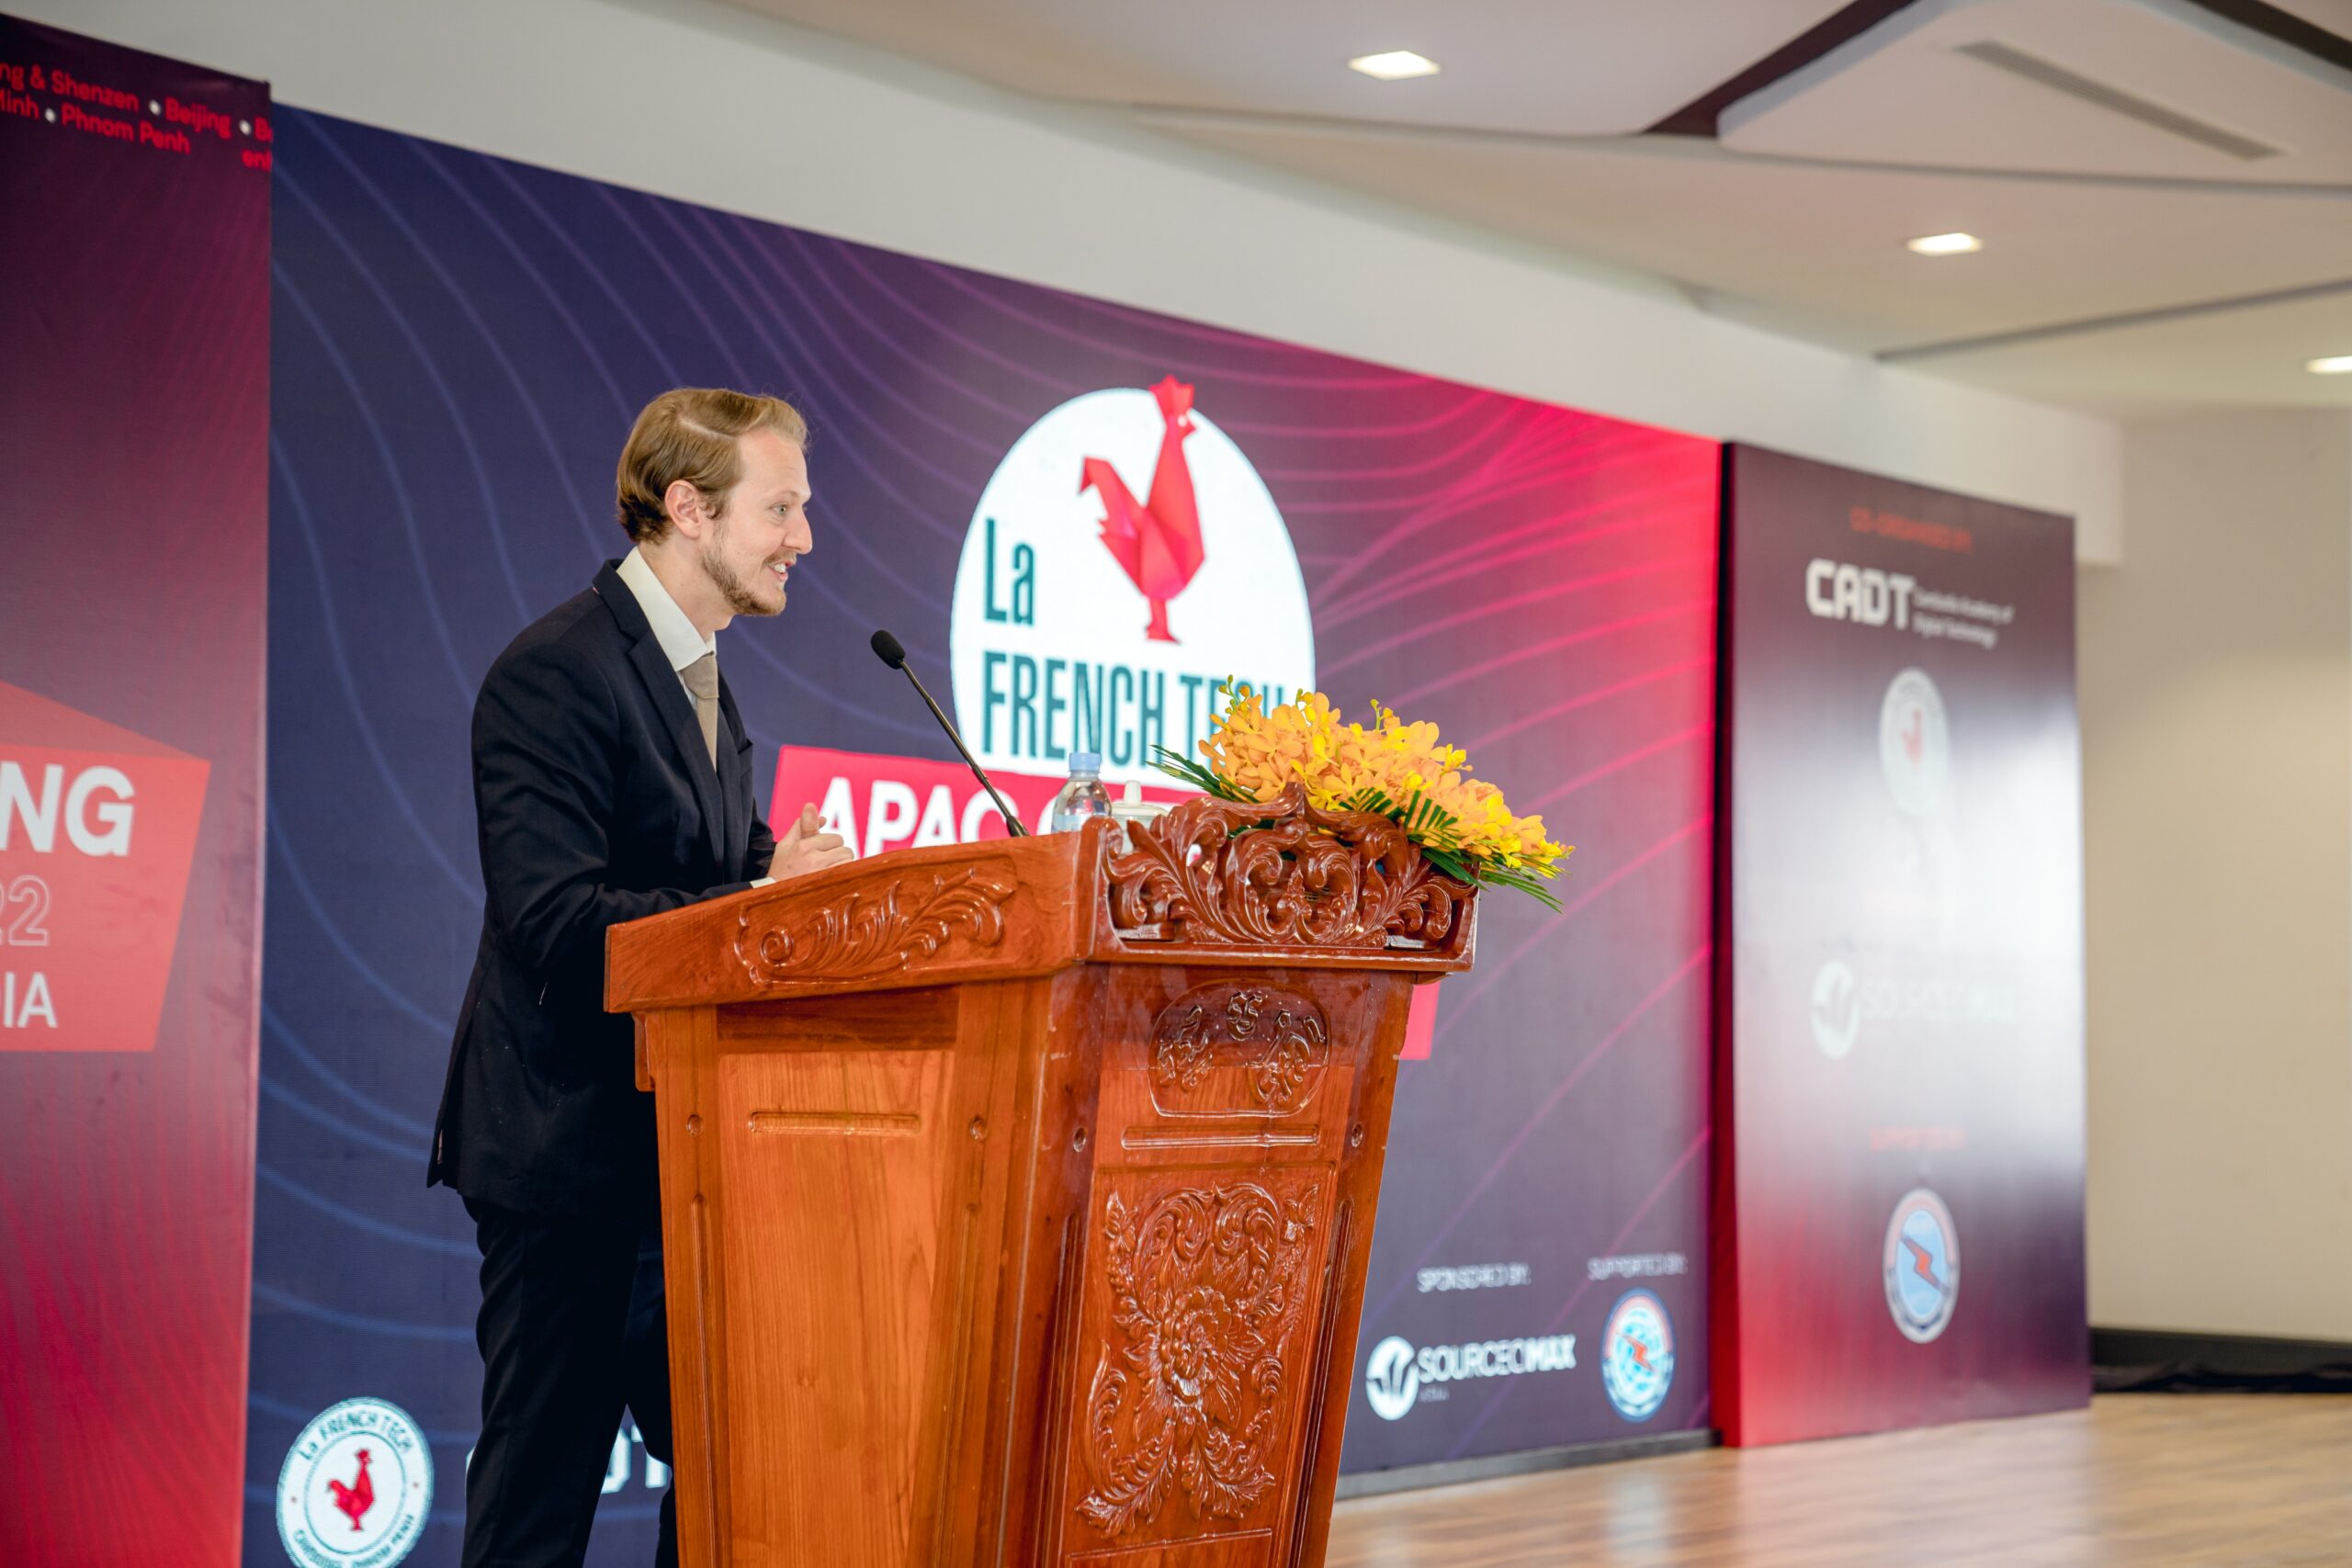 CADT & La FRENCH TECH TO CO-ORGANIZED THE APAC GATHERING